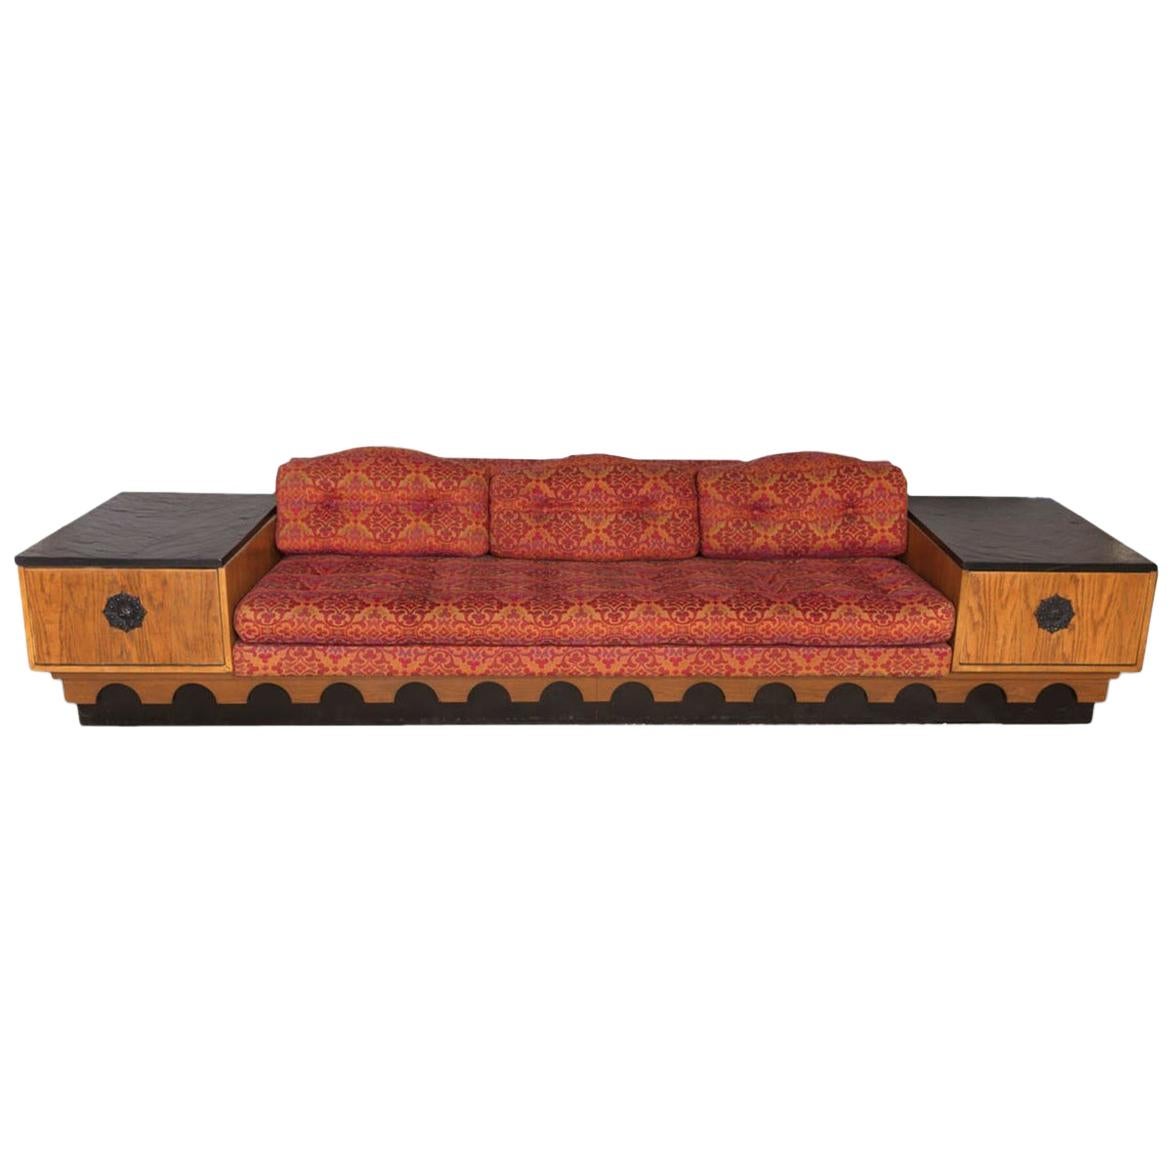 Adrian Pearsall Strictly Spanish Plinth Sofa Craft Assoc 1960 YEAR-END  CLEARANCE at 1stDibs | adrian in spanish, strictly on the sofa, adrian  pearsall sofa